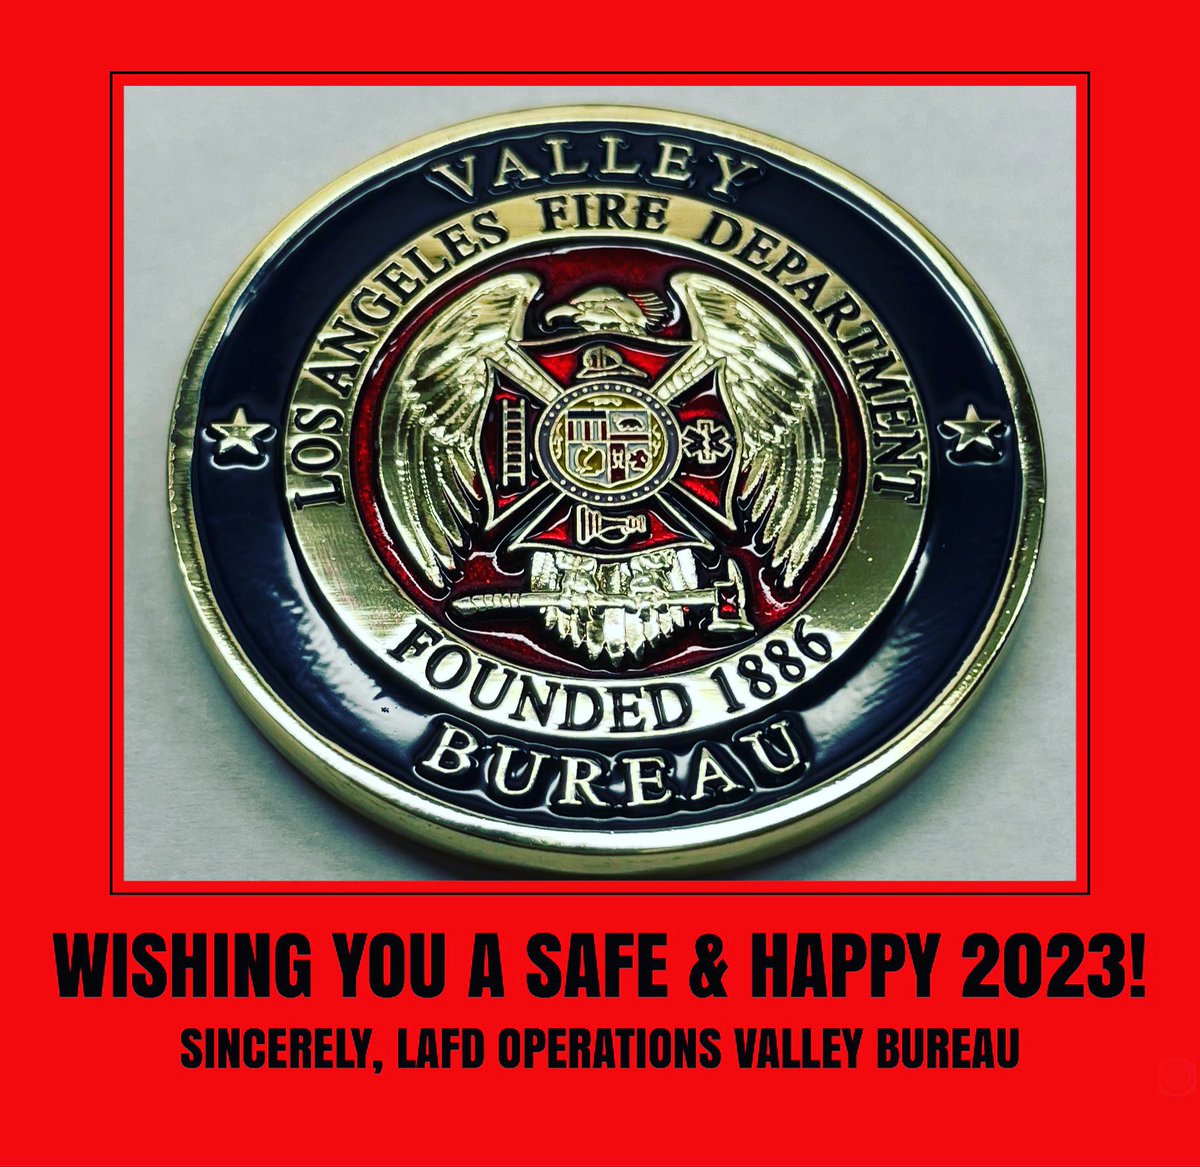 Happy 2023! From all of us at your LAFD Operations Valley Bureau! #LosAngeles